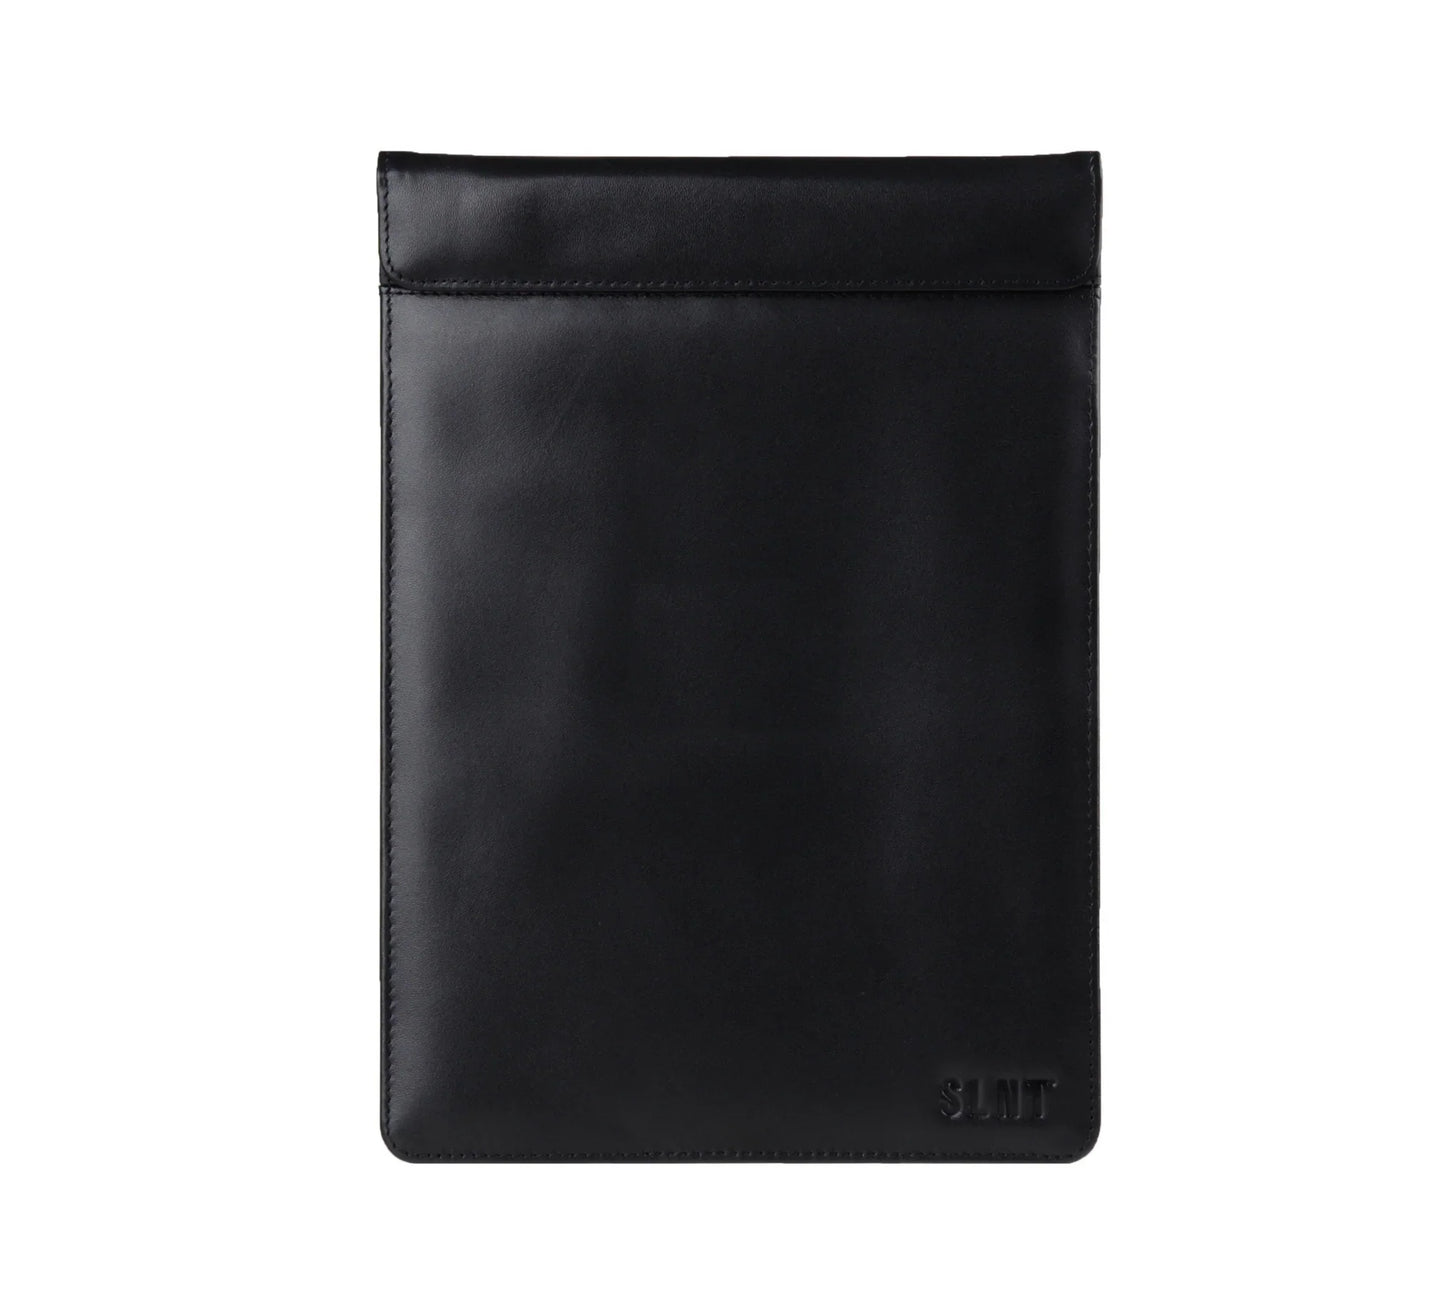 SLNT Utility Faraday Bags for Tablets and Multiple Devices Black